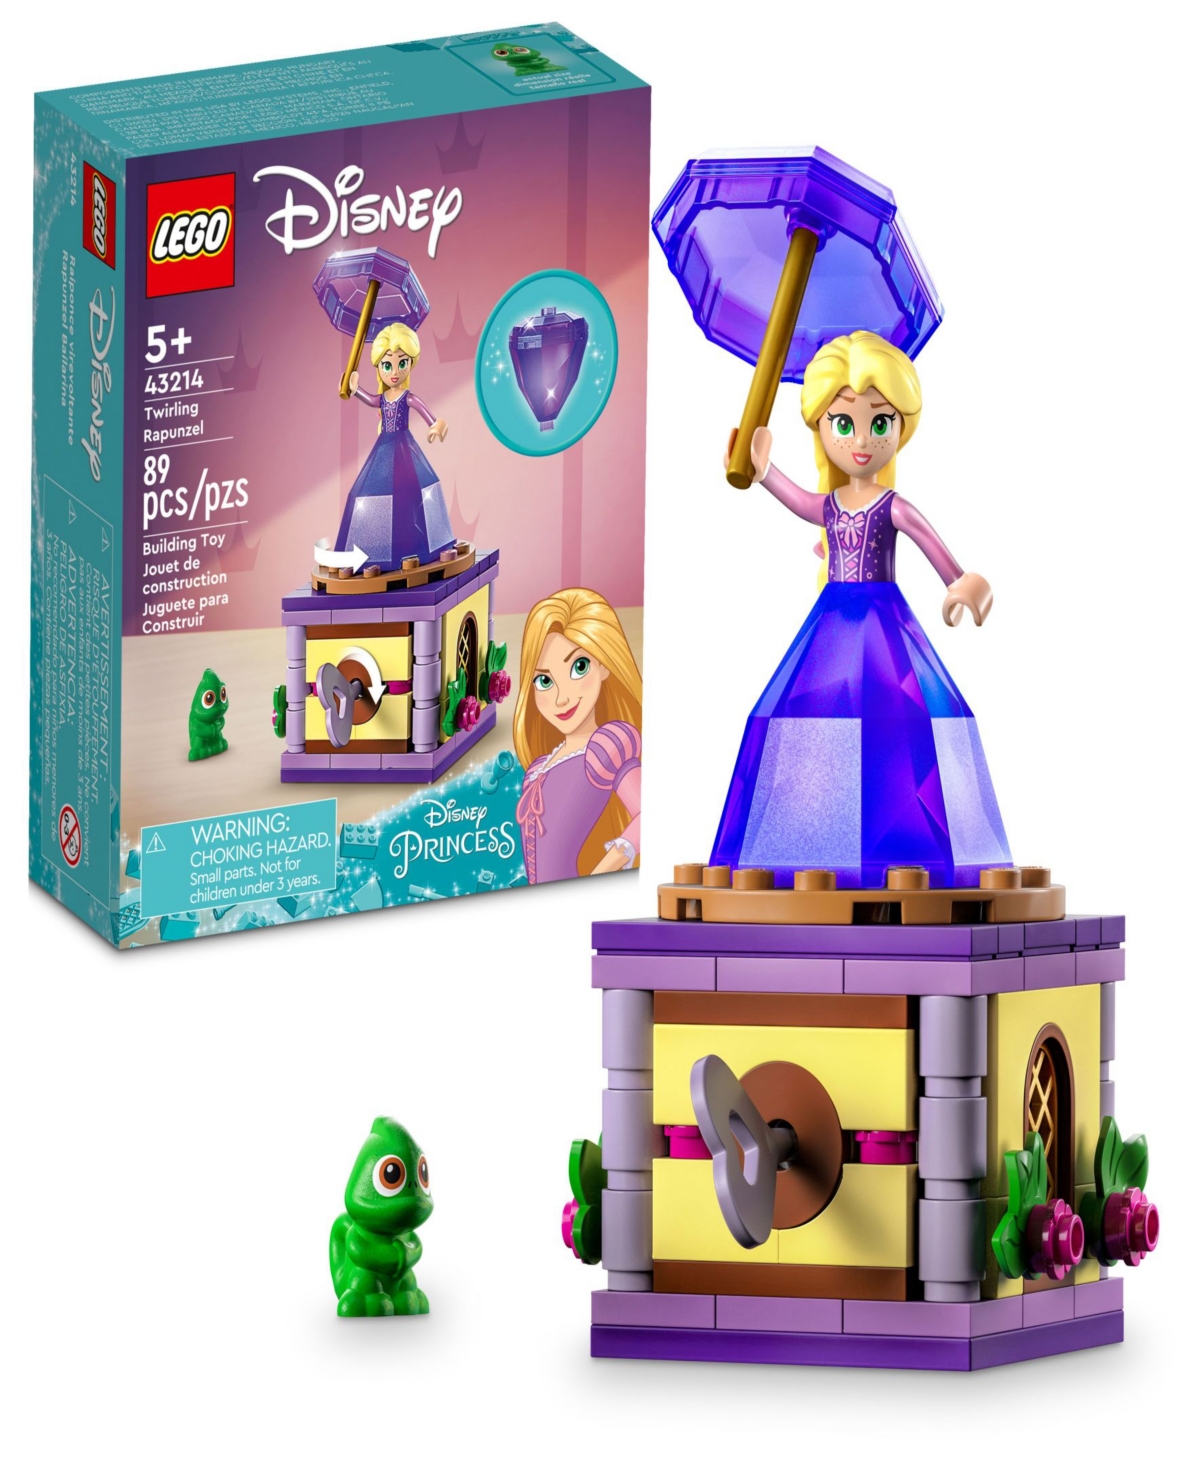 Lego Kids' Disney Princess Twirling Rapunzel 43214 Toy Building Set With Rapunzel And Pascal Figures In Multicolor